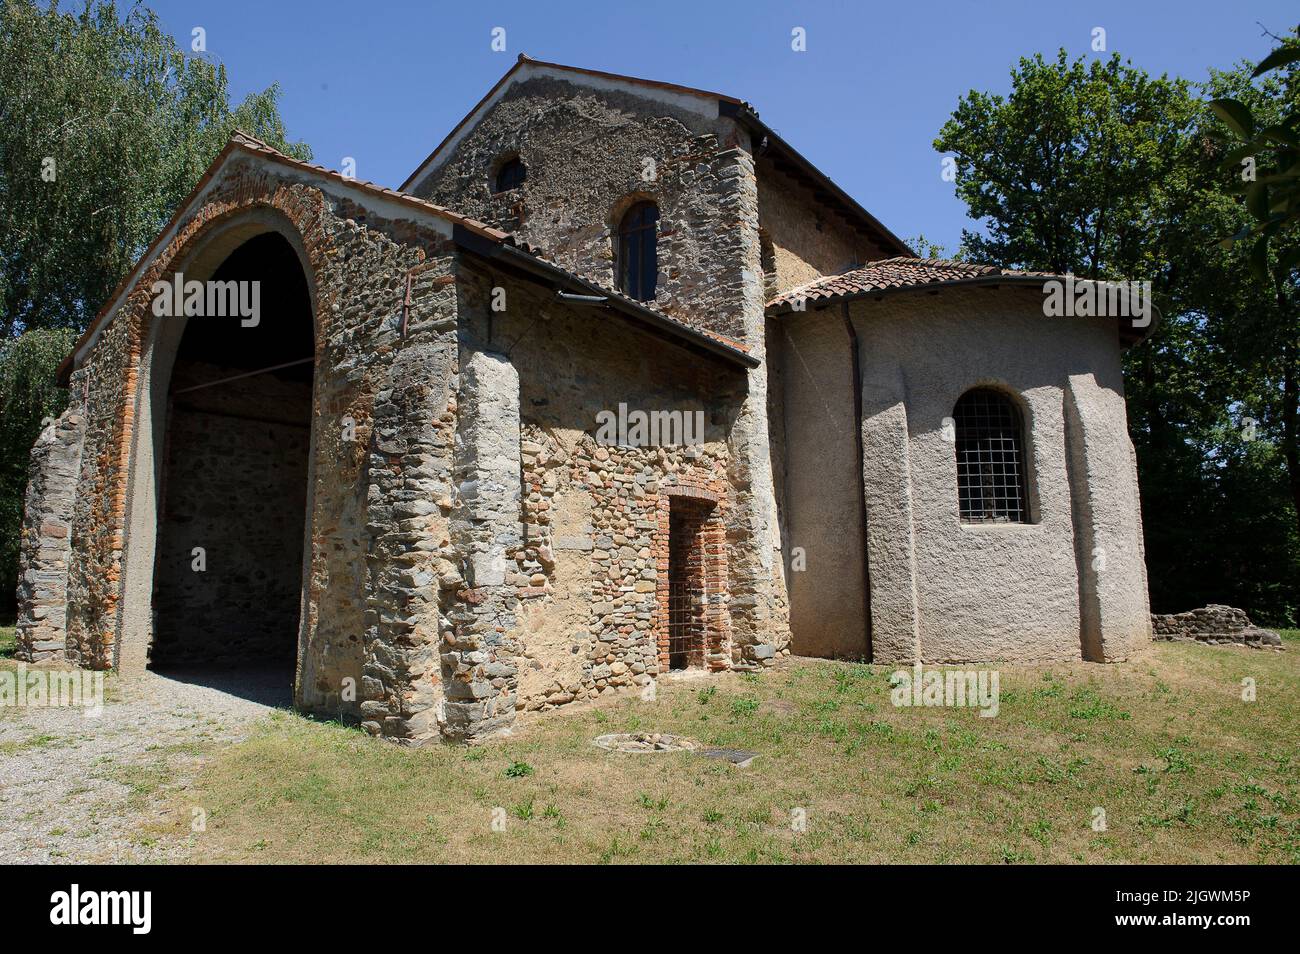 Europe, Italy, Lombardy, Varese province. The archaeological area of Castelseprio with the ruins of a village destroyed in the 13th century. Unesco - Stock Photo